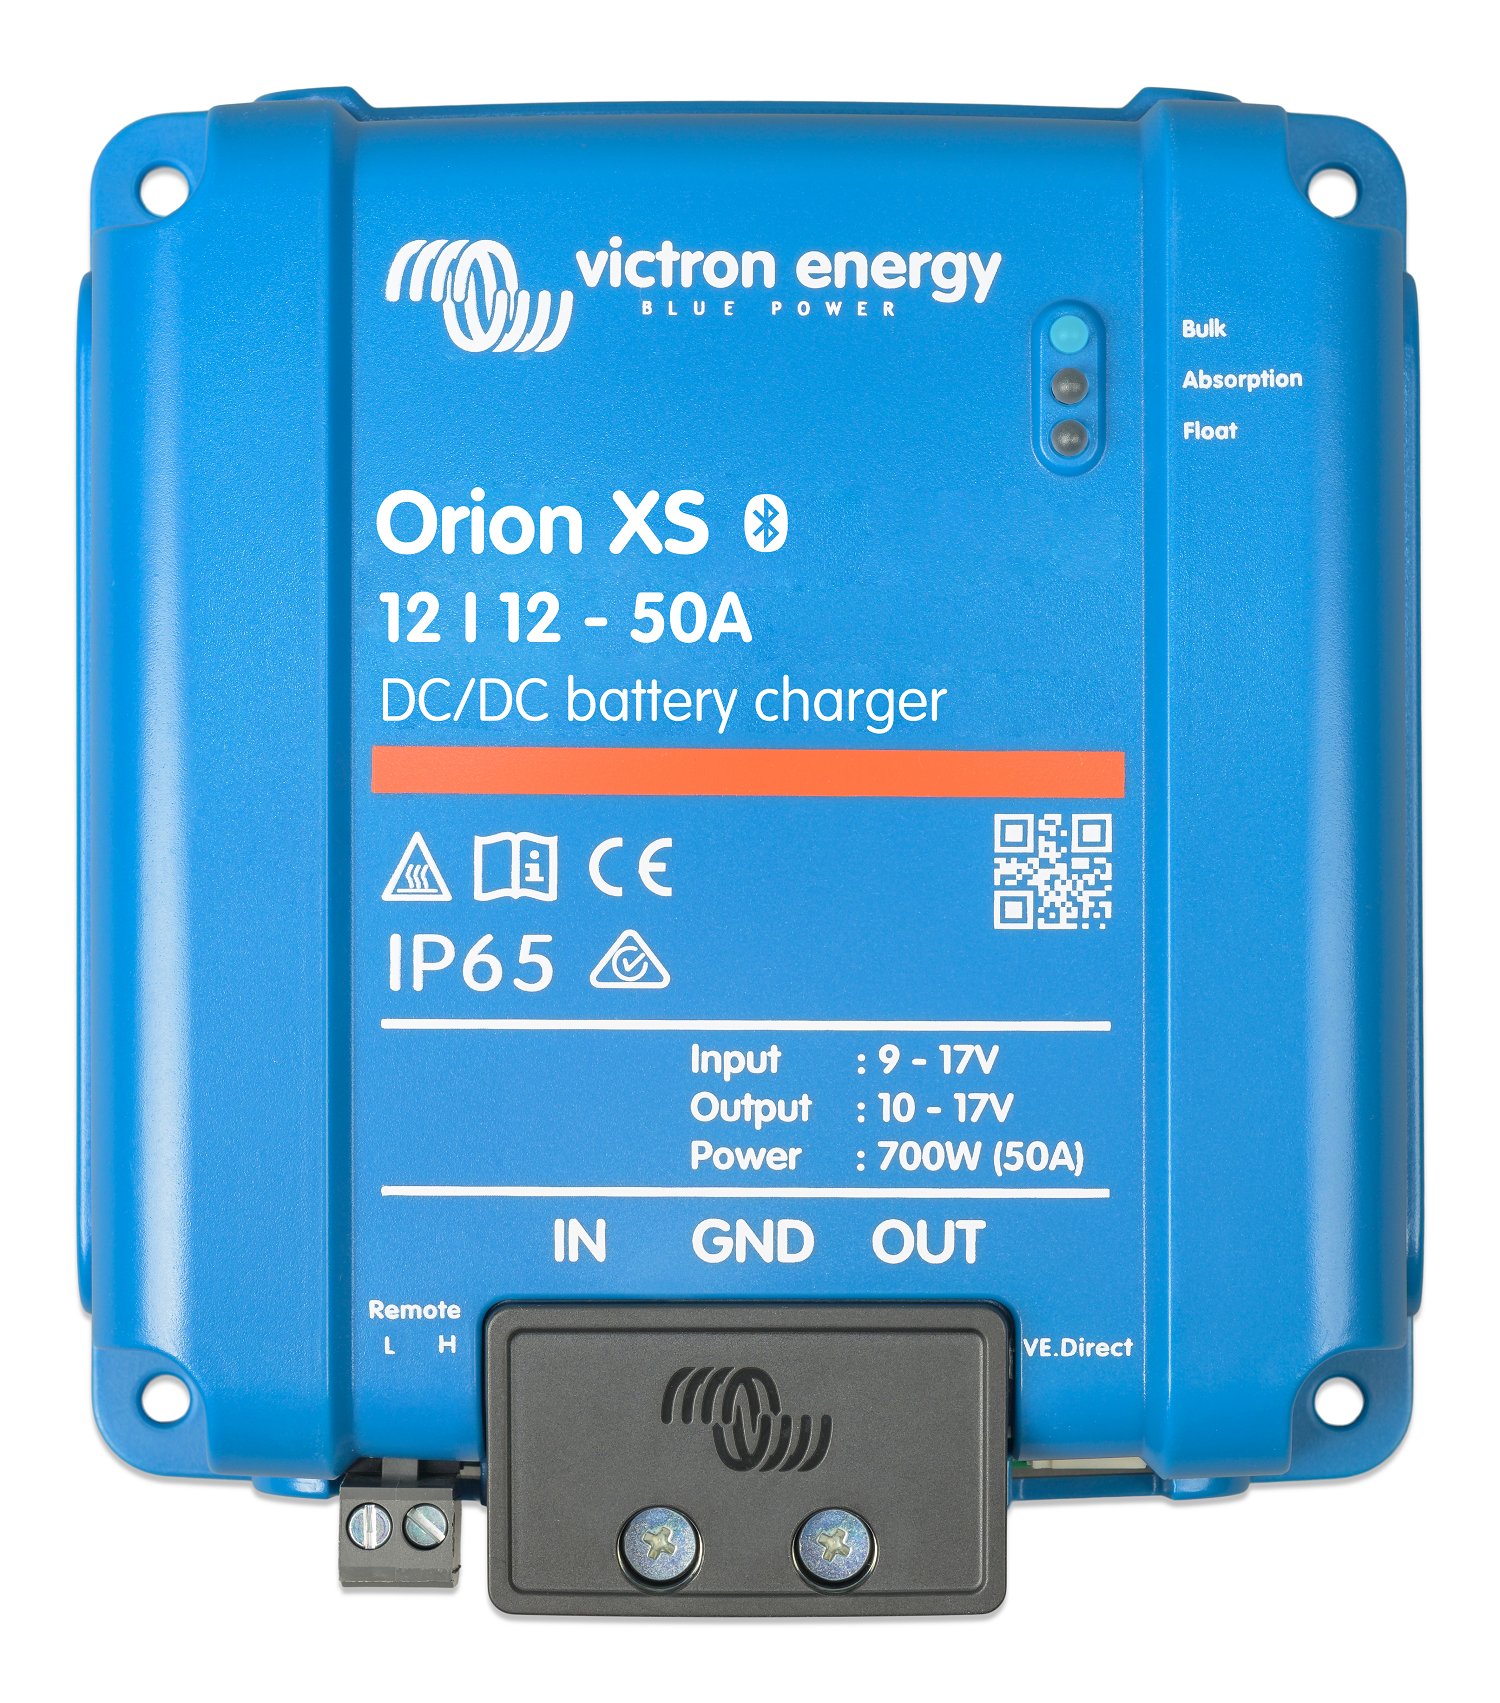 Is there an alert for when the Victron Orion XS is available for purchase?